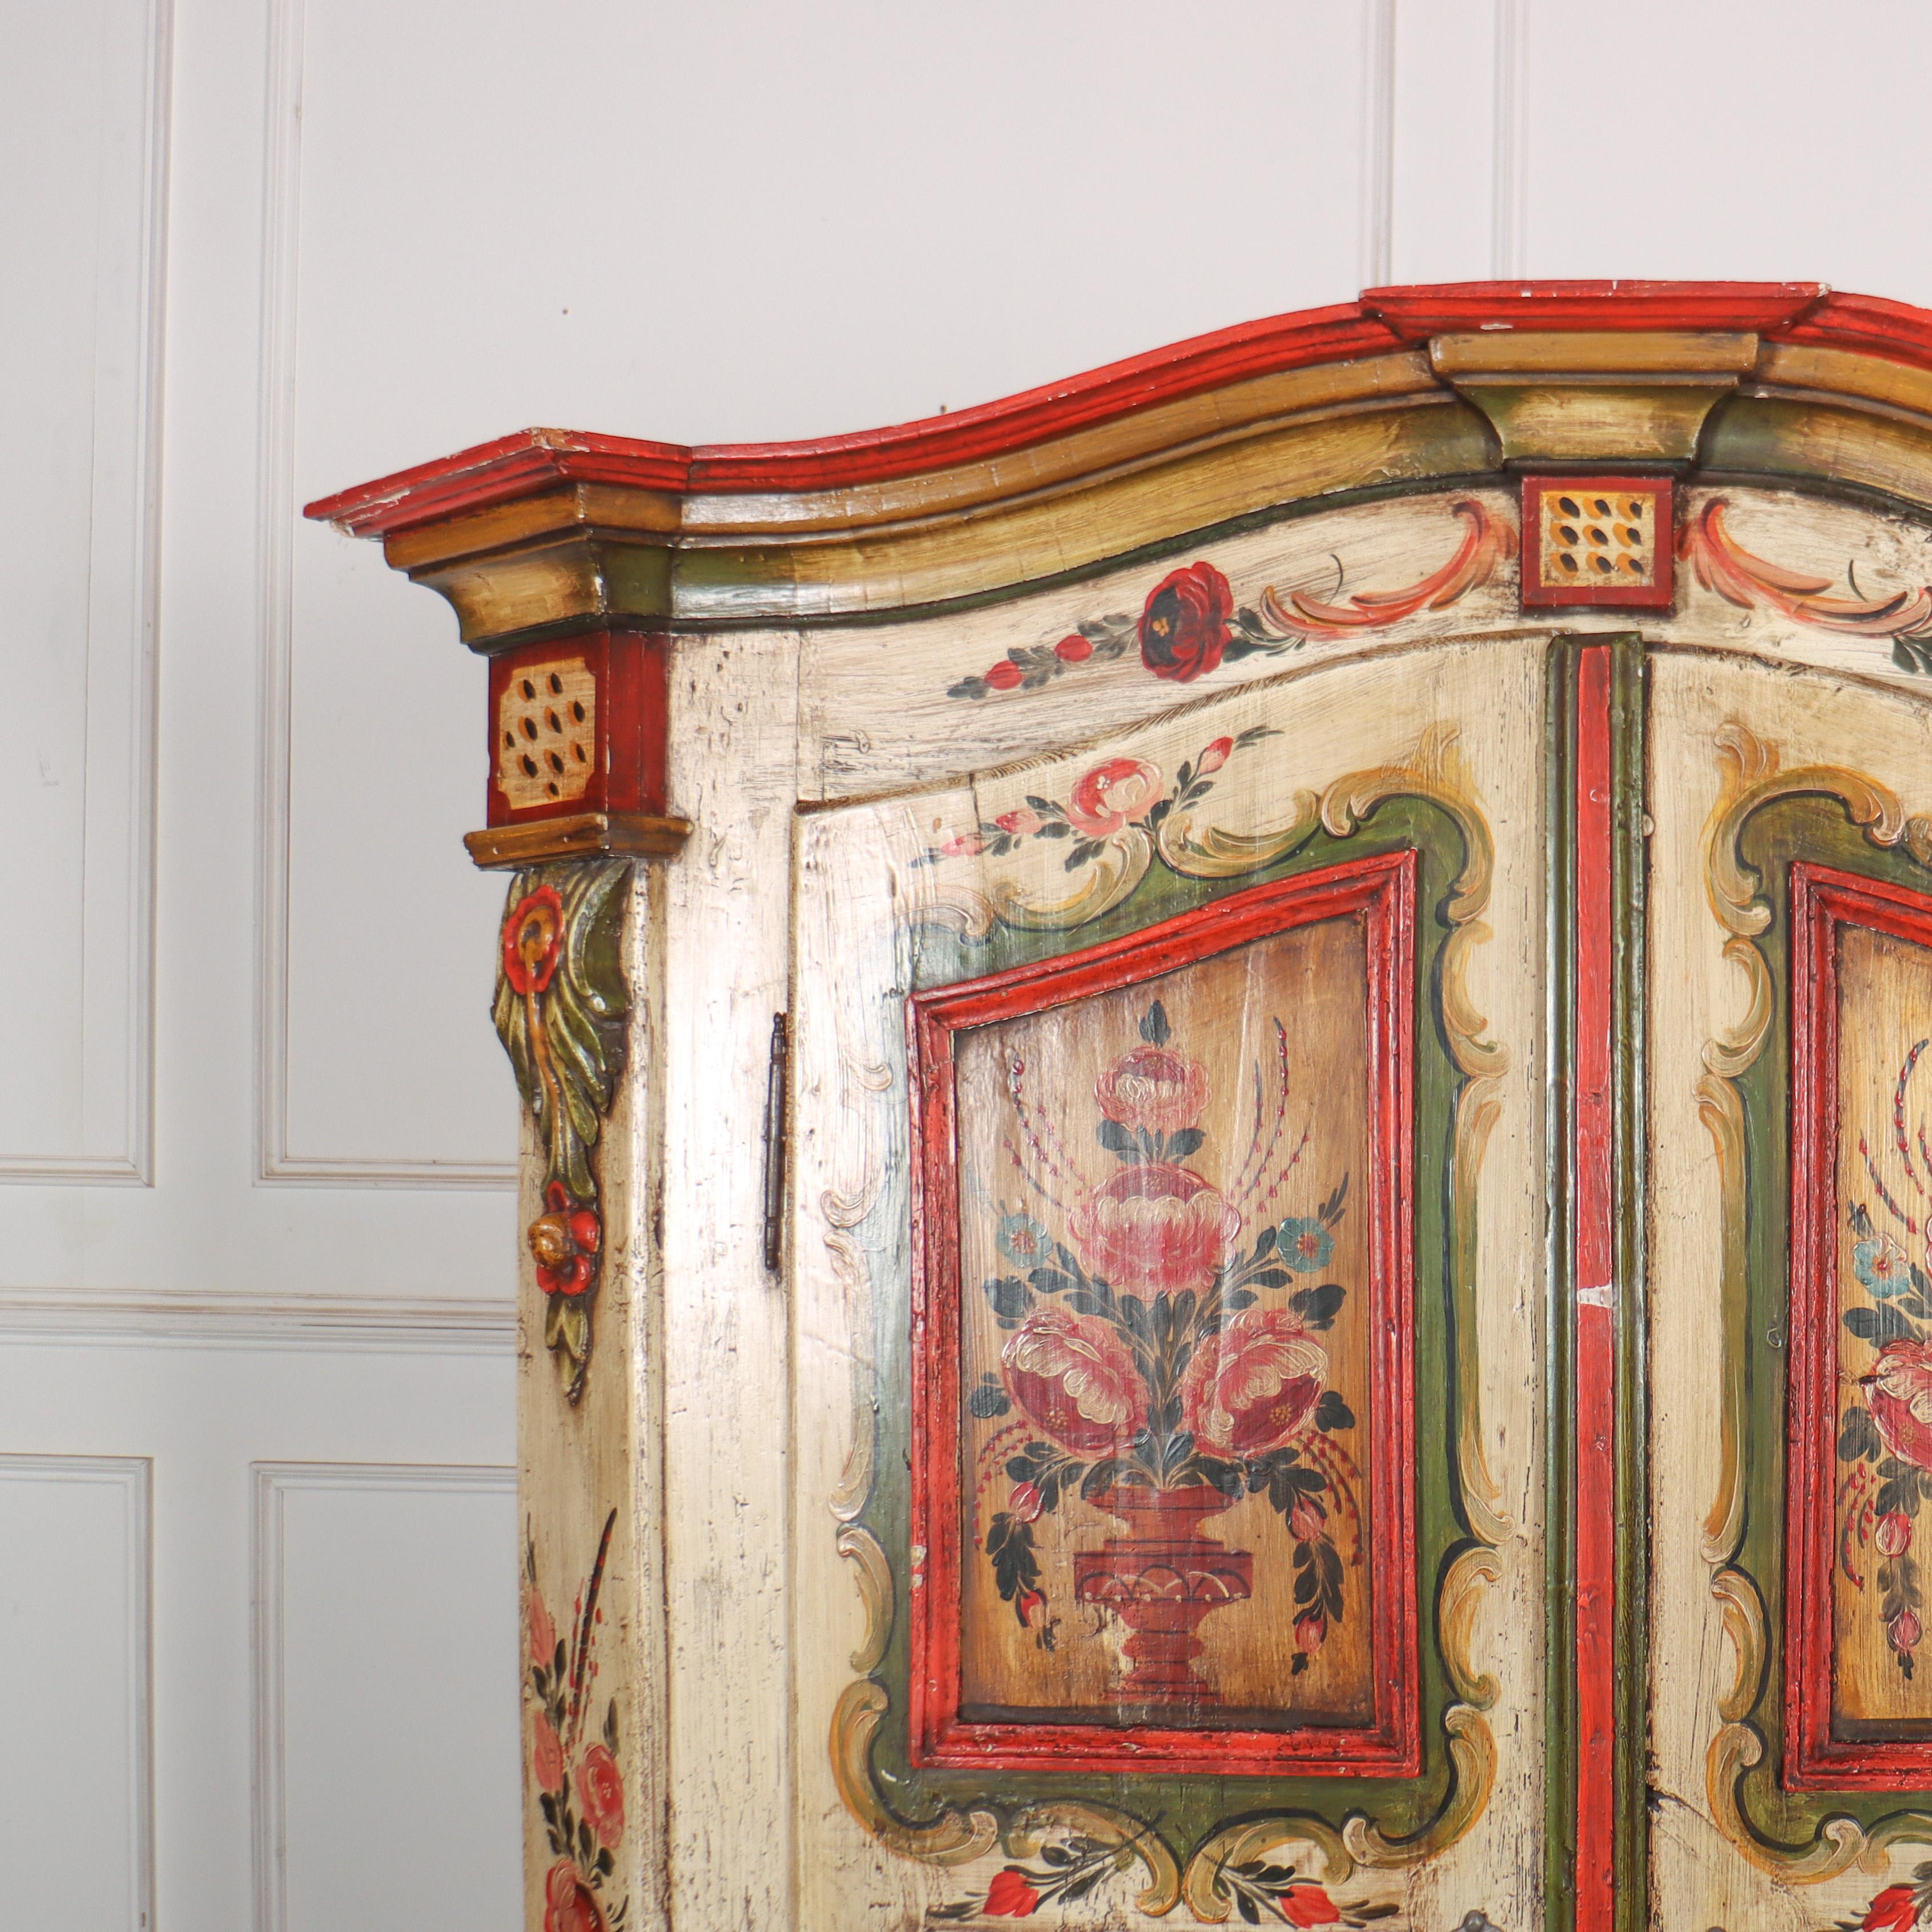 Early 19th C Austrian marriage armoire with a hanging rail and later paint decoration. 1830.

Reference: 8306

Dimensions
58 inches (147 cms) Wide
24 inches (61 cms) Deep
71 inches (180 cms) High